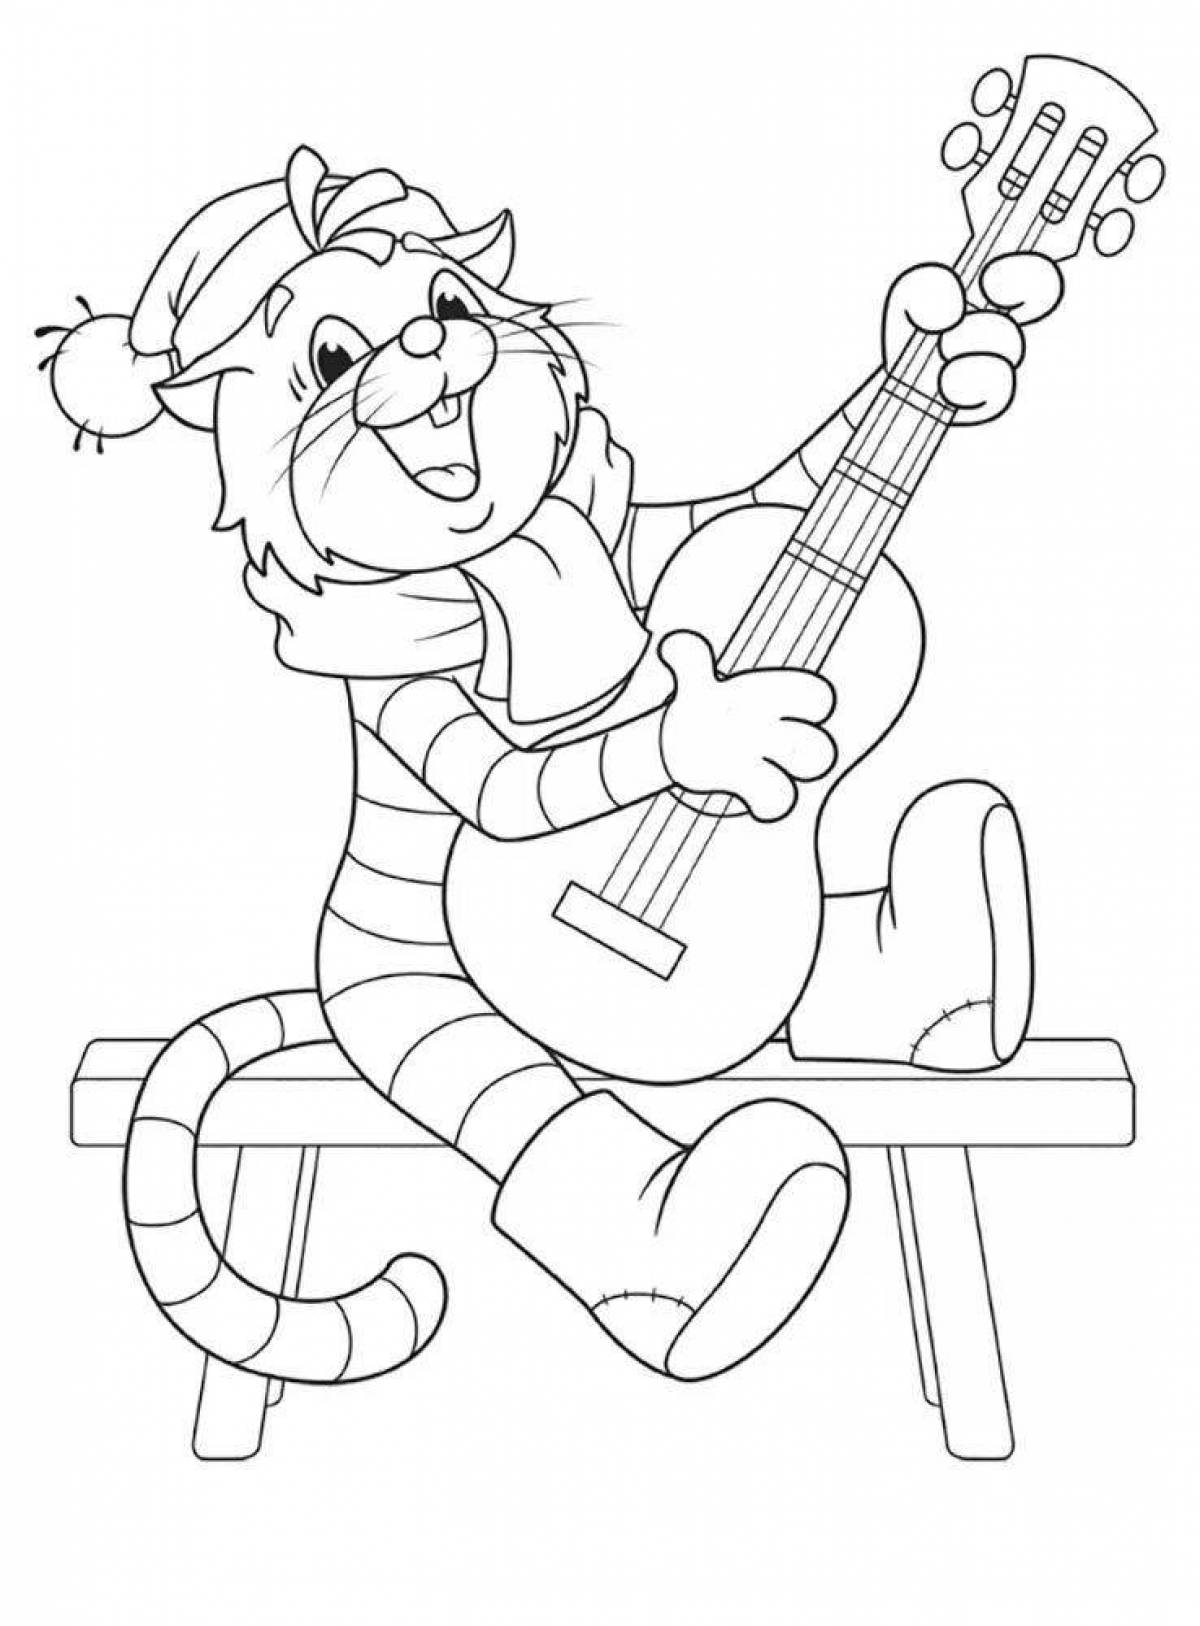 Glowing buttermilk coloring pages for girls